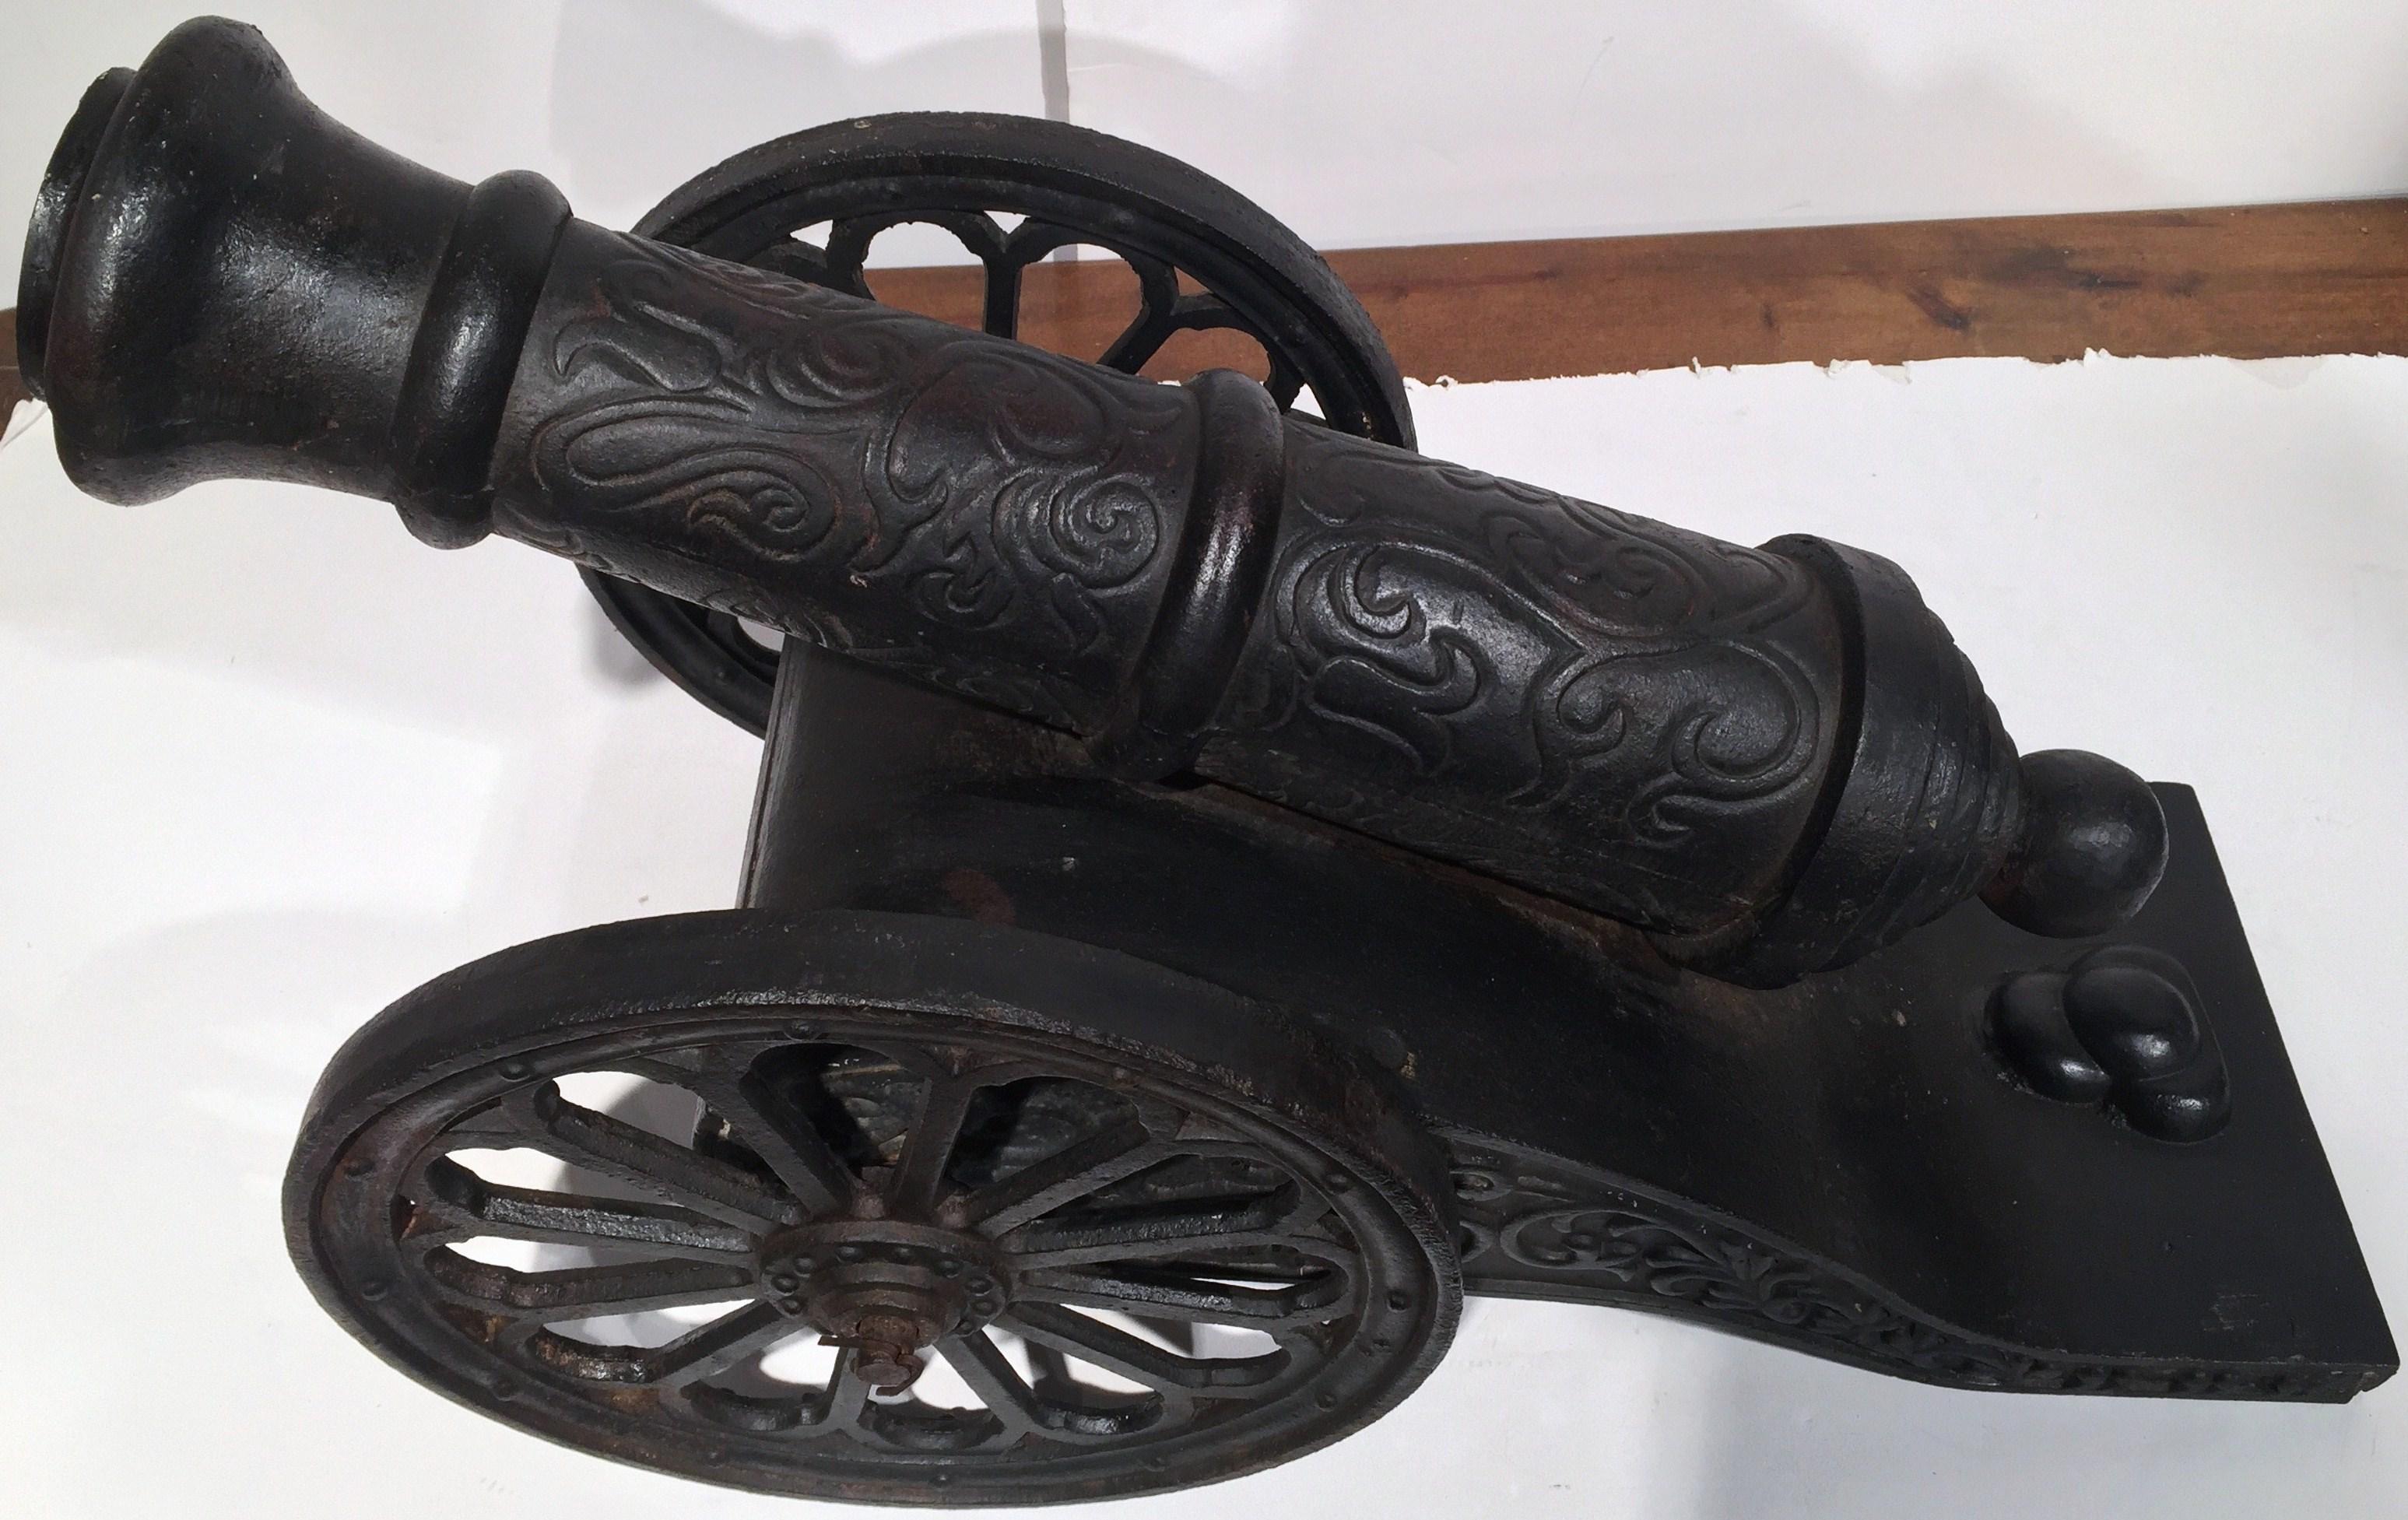 Pair of 18th Century French Patinated Decorative Wrought Iron Cannons on Wheels 2